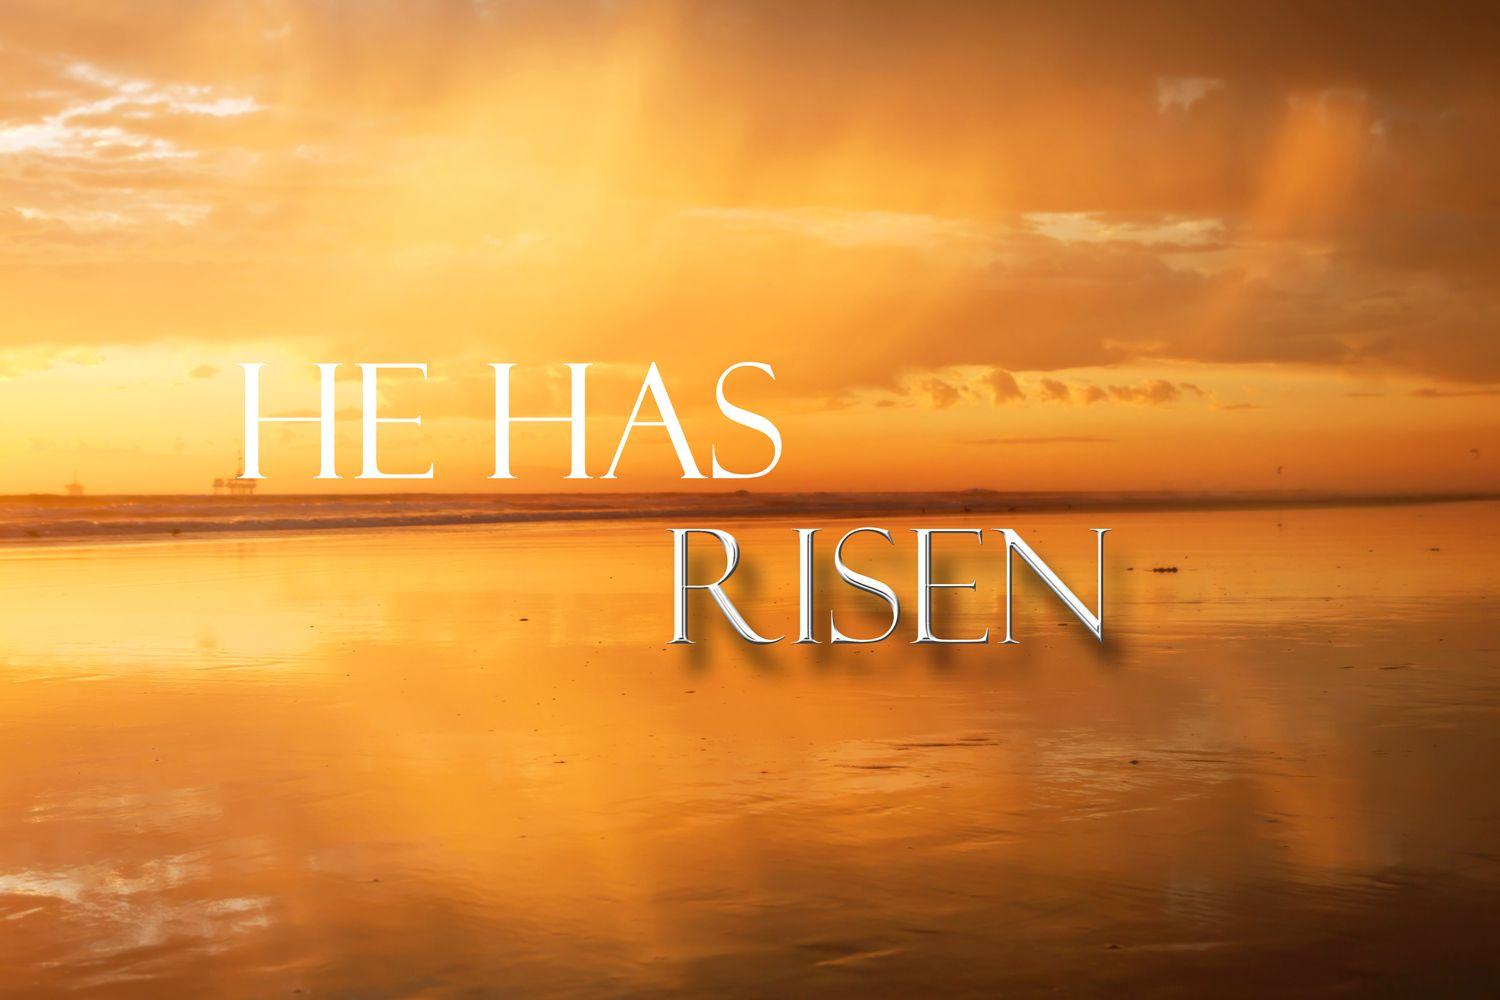 download the new Risen